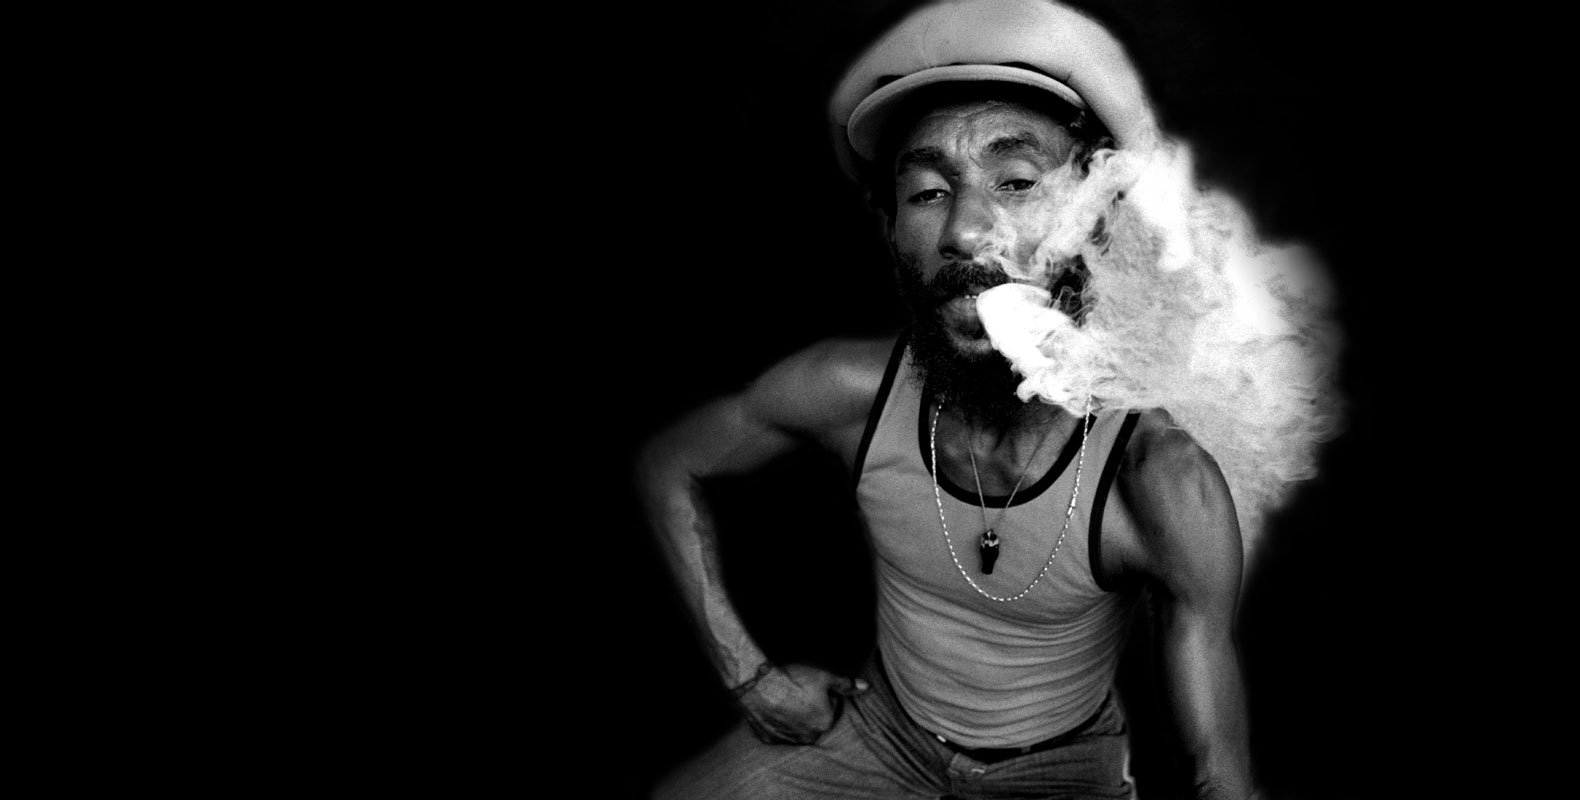 Happy birthday to the magnificent Lee \Scratch\ Perry -  